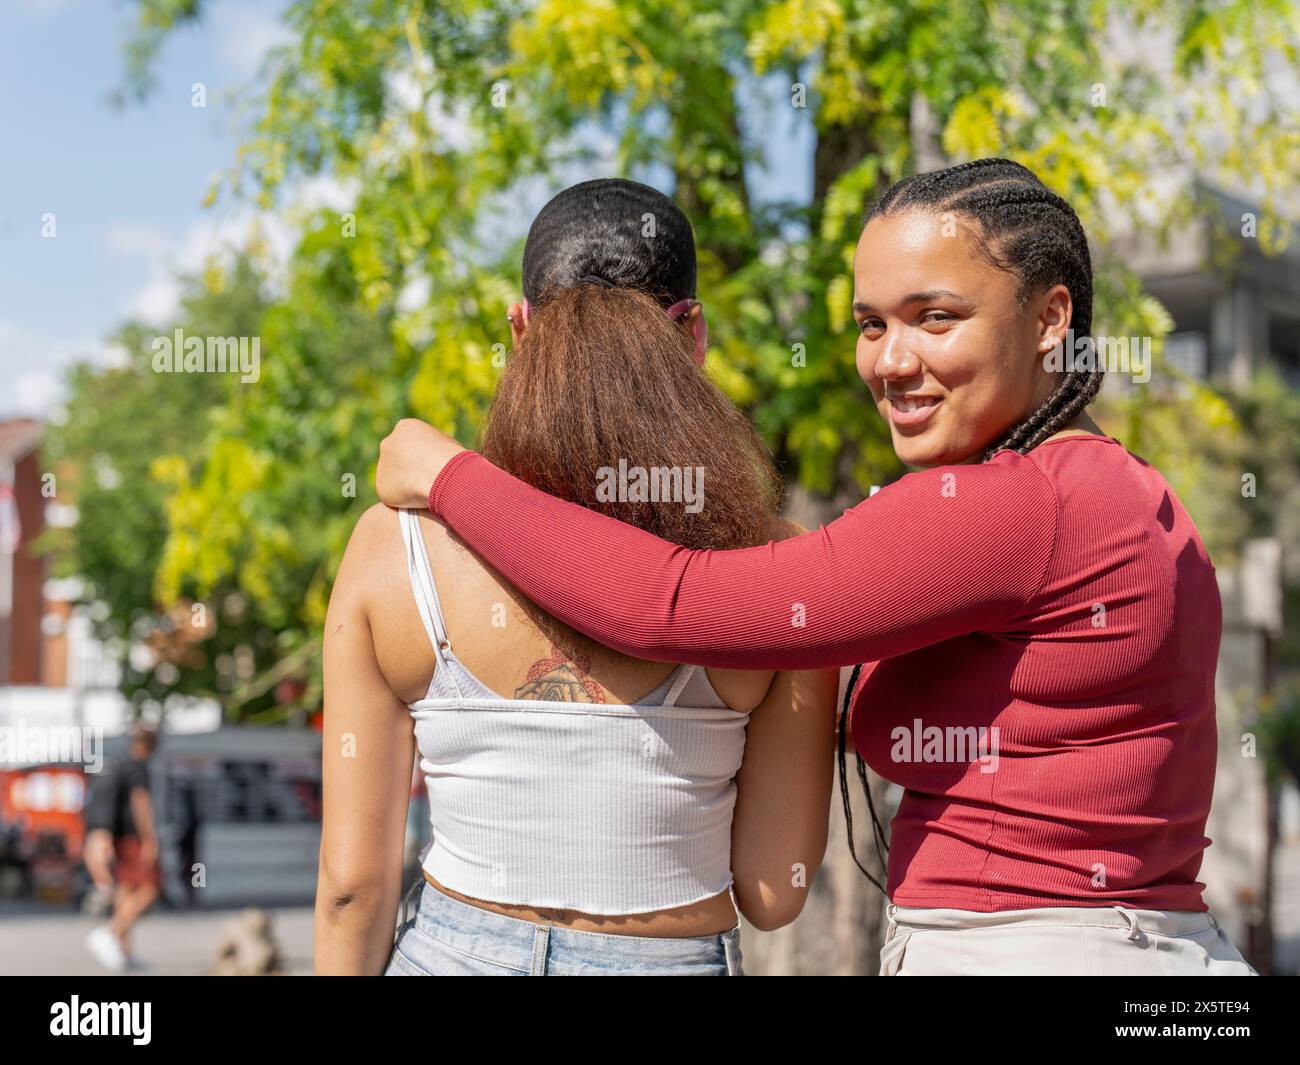 Portrait of smiling woman embracing friend on sunny day Stock Photo